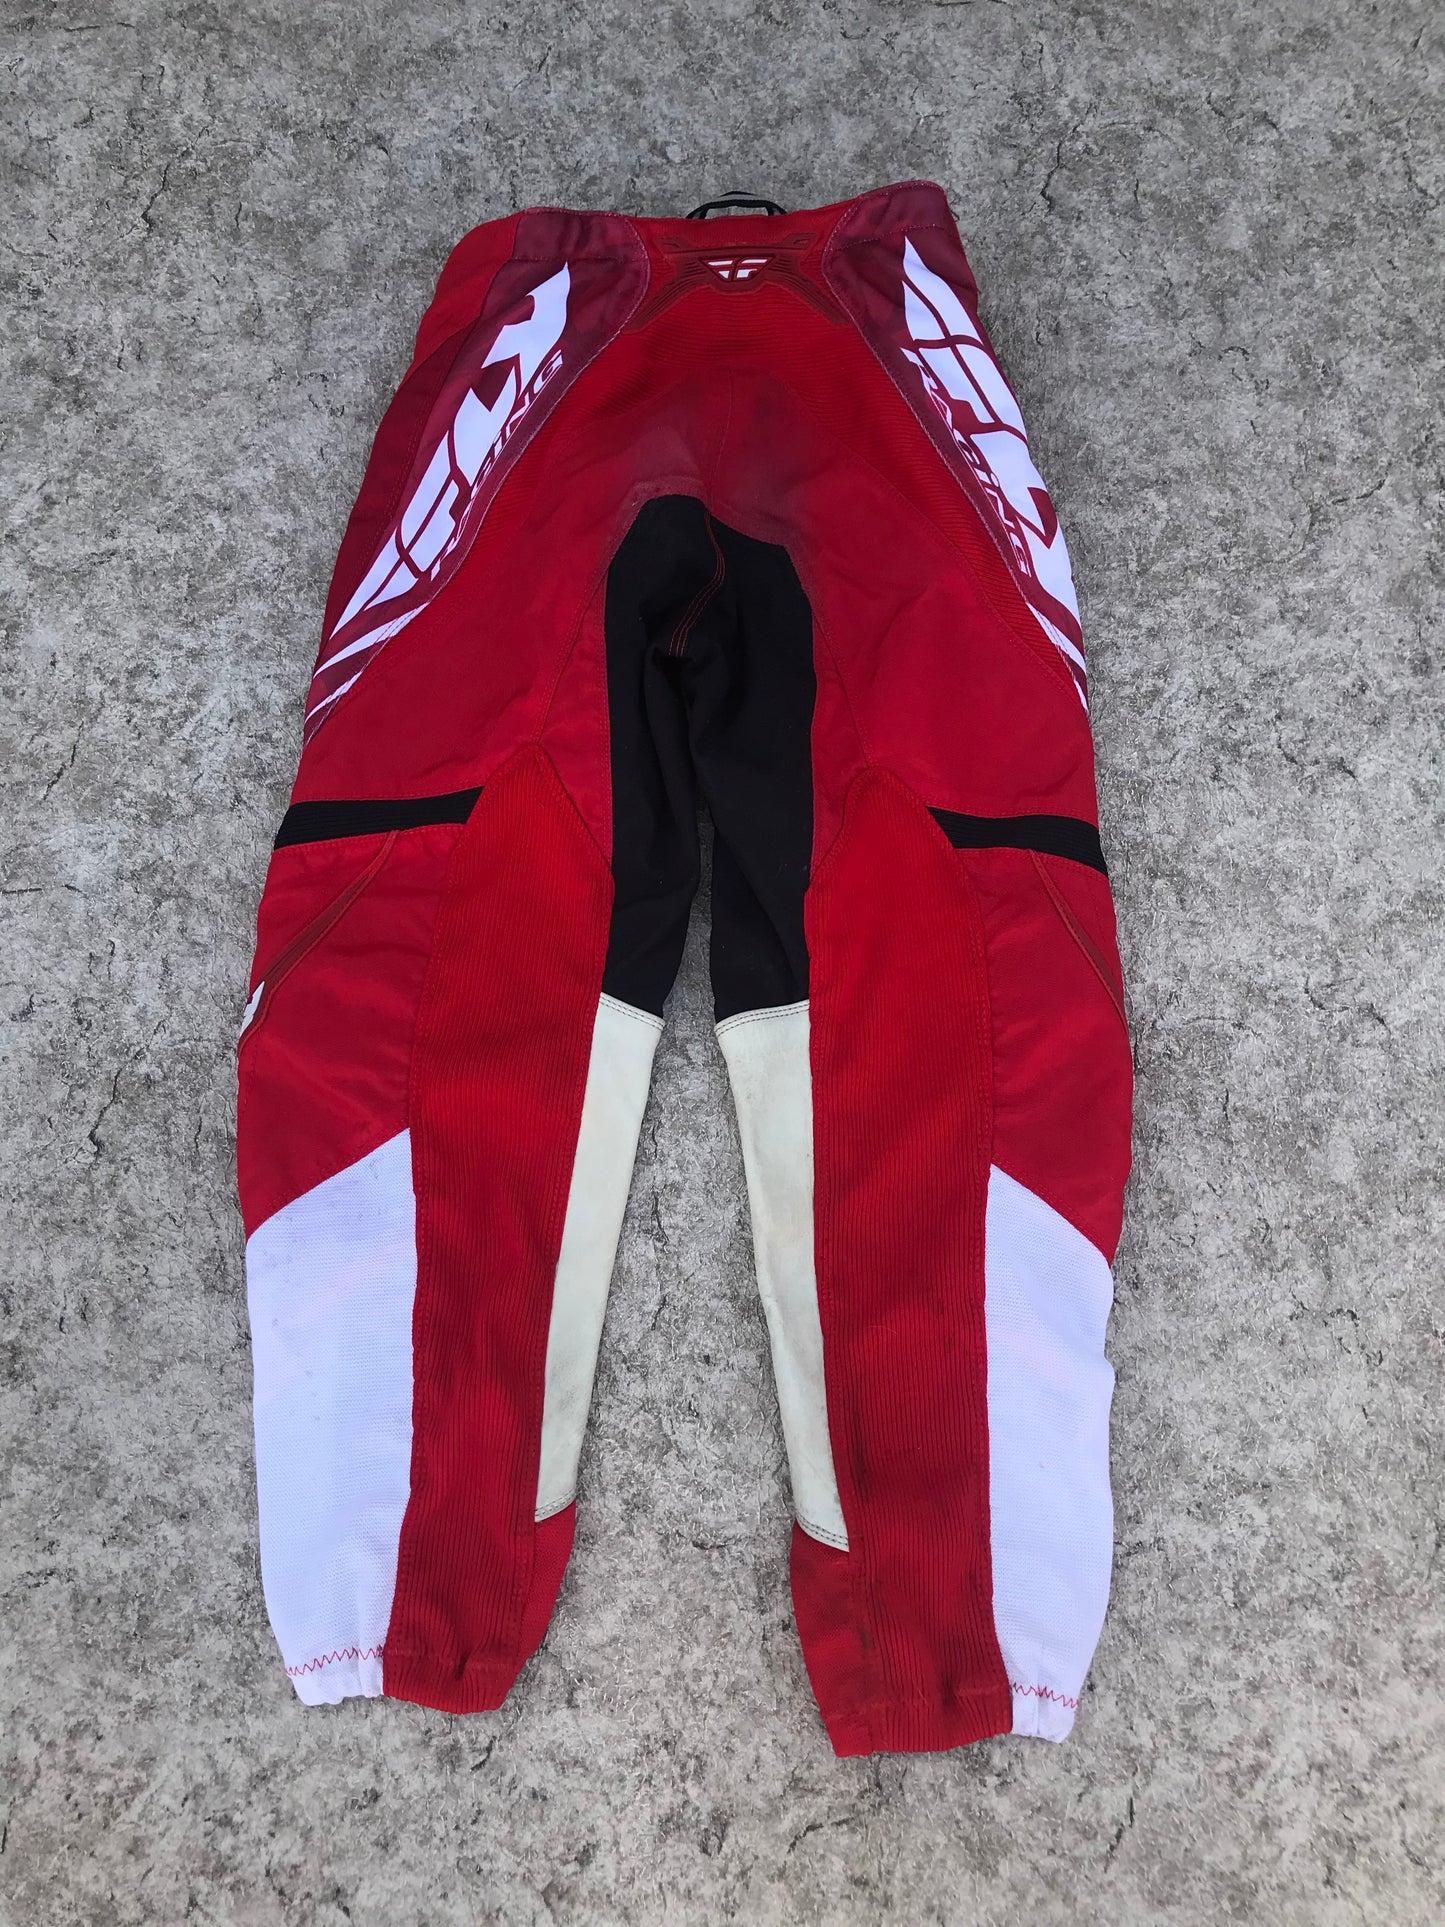 Motocross BMX Dirt Bike Pants Child Size 28 inch Size 14 Fly Racing Leather Knee Shins Red White Minor Marks